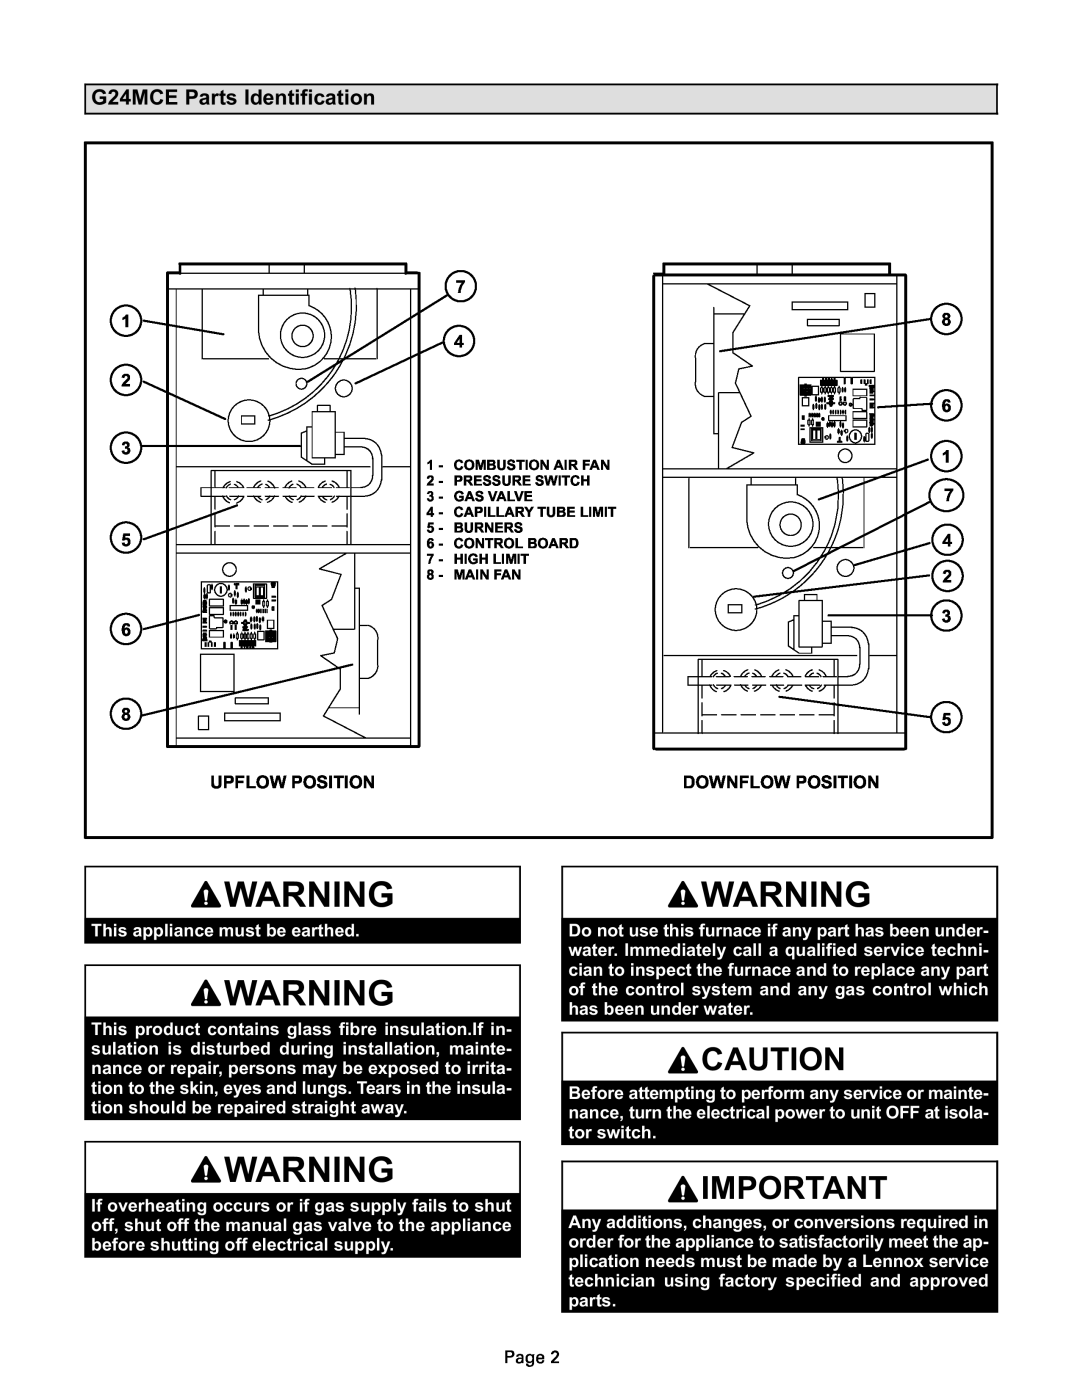 Lenoxx Electronics manual G24MCE Parts Identification, This appliance must be earthed 